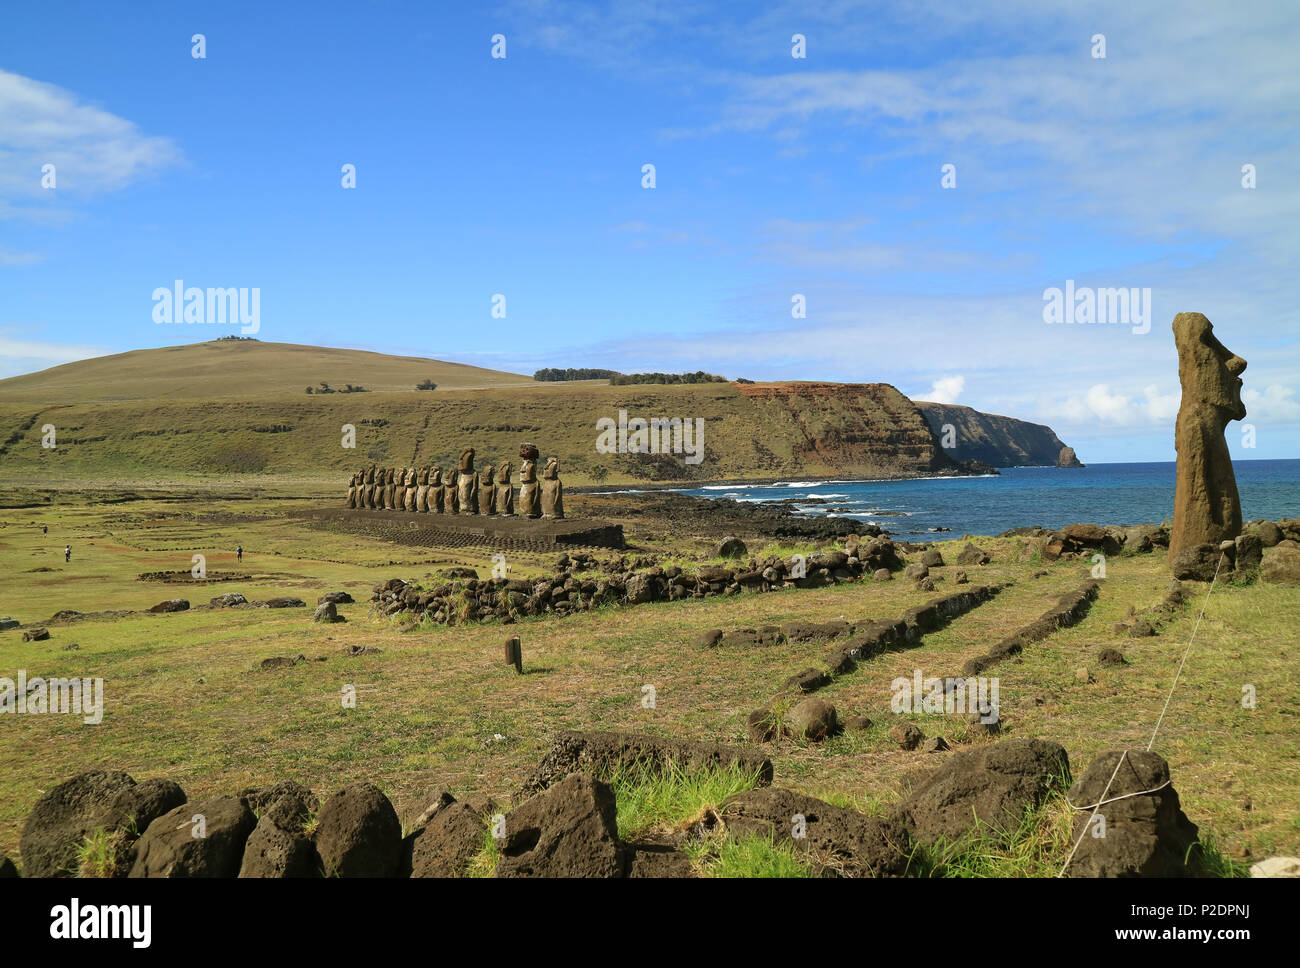 Ahu Tongariki, the largest Ahu on Easter Island with Pacific ocean on its back, Chile, South America Stock Photo